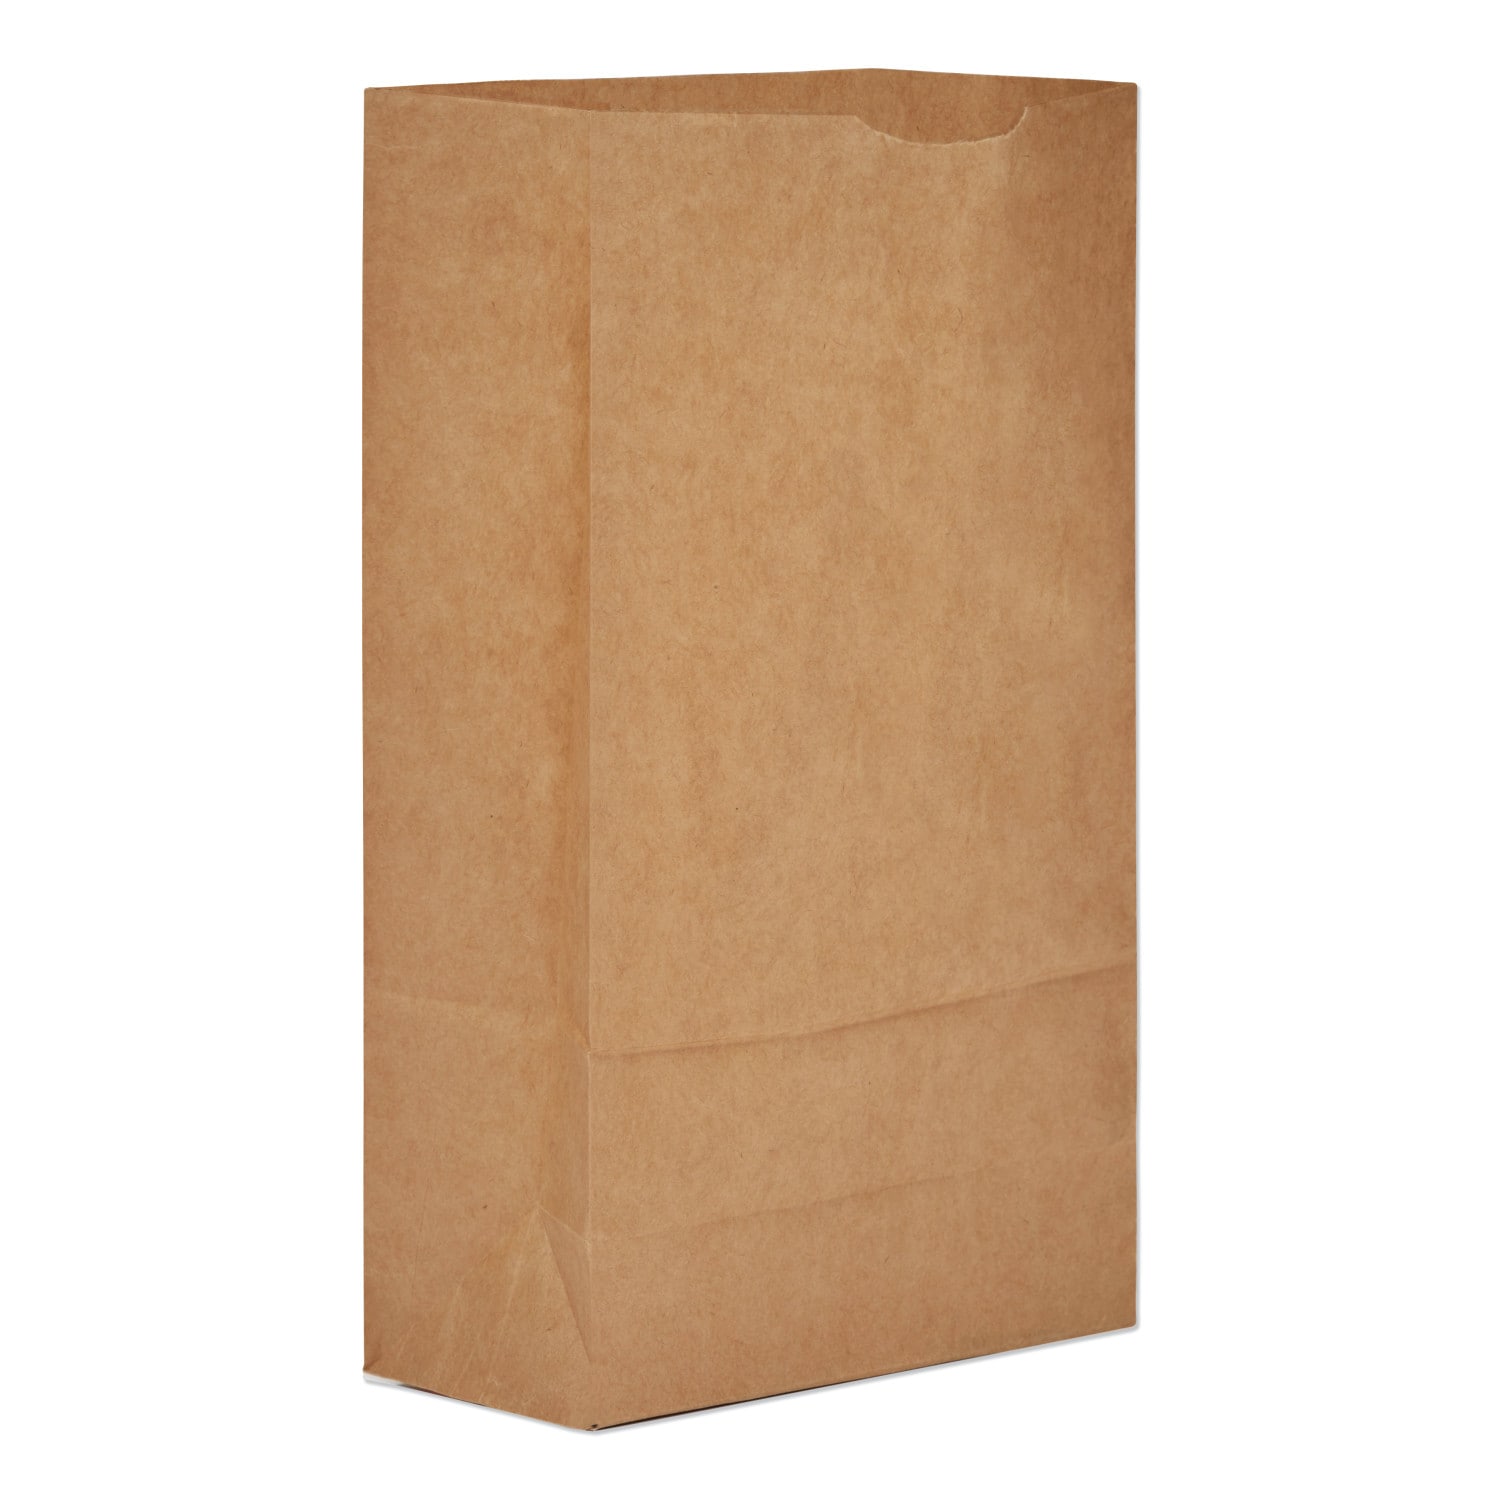 [50 Pack] Heavy Duty Kraft Paper Bags with Handles 13 x 10 x 5 12 LB  Twisted Rope Retail Shopping Gift Durable Natural Brown Barrel Sack